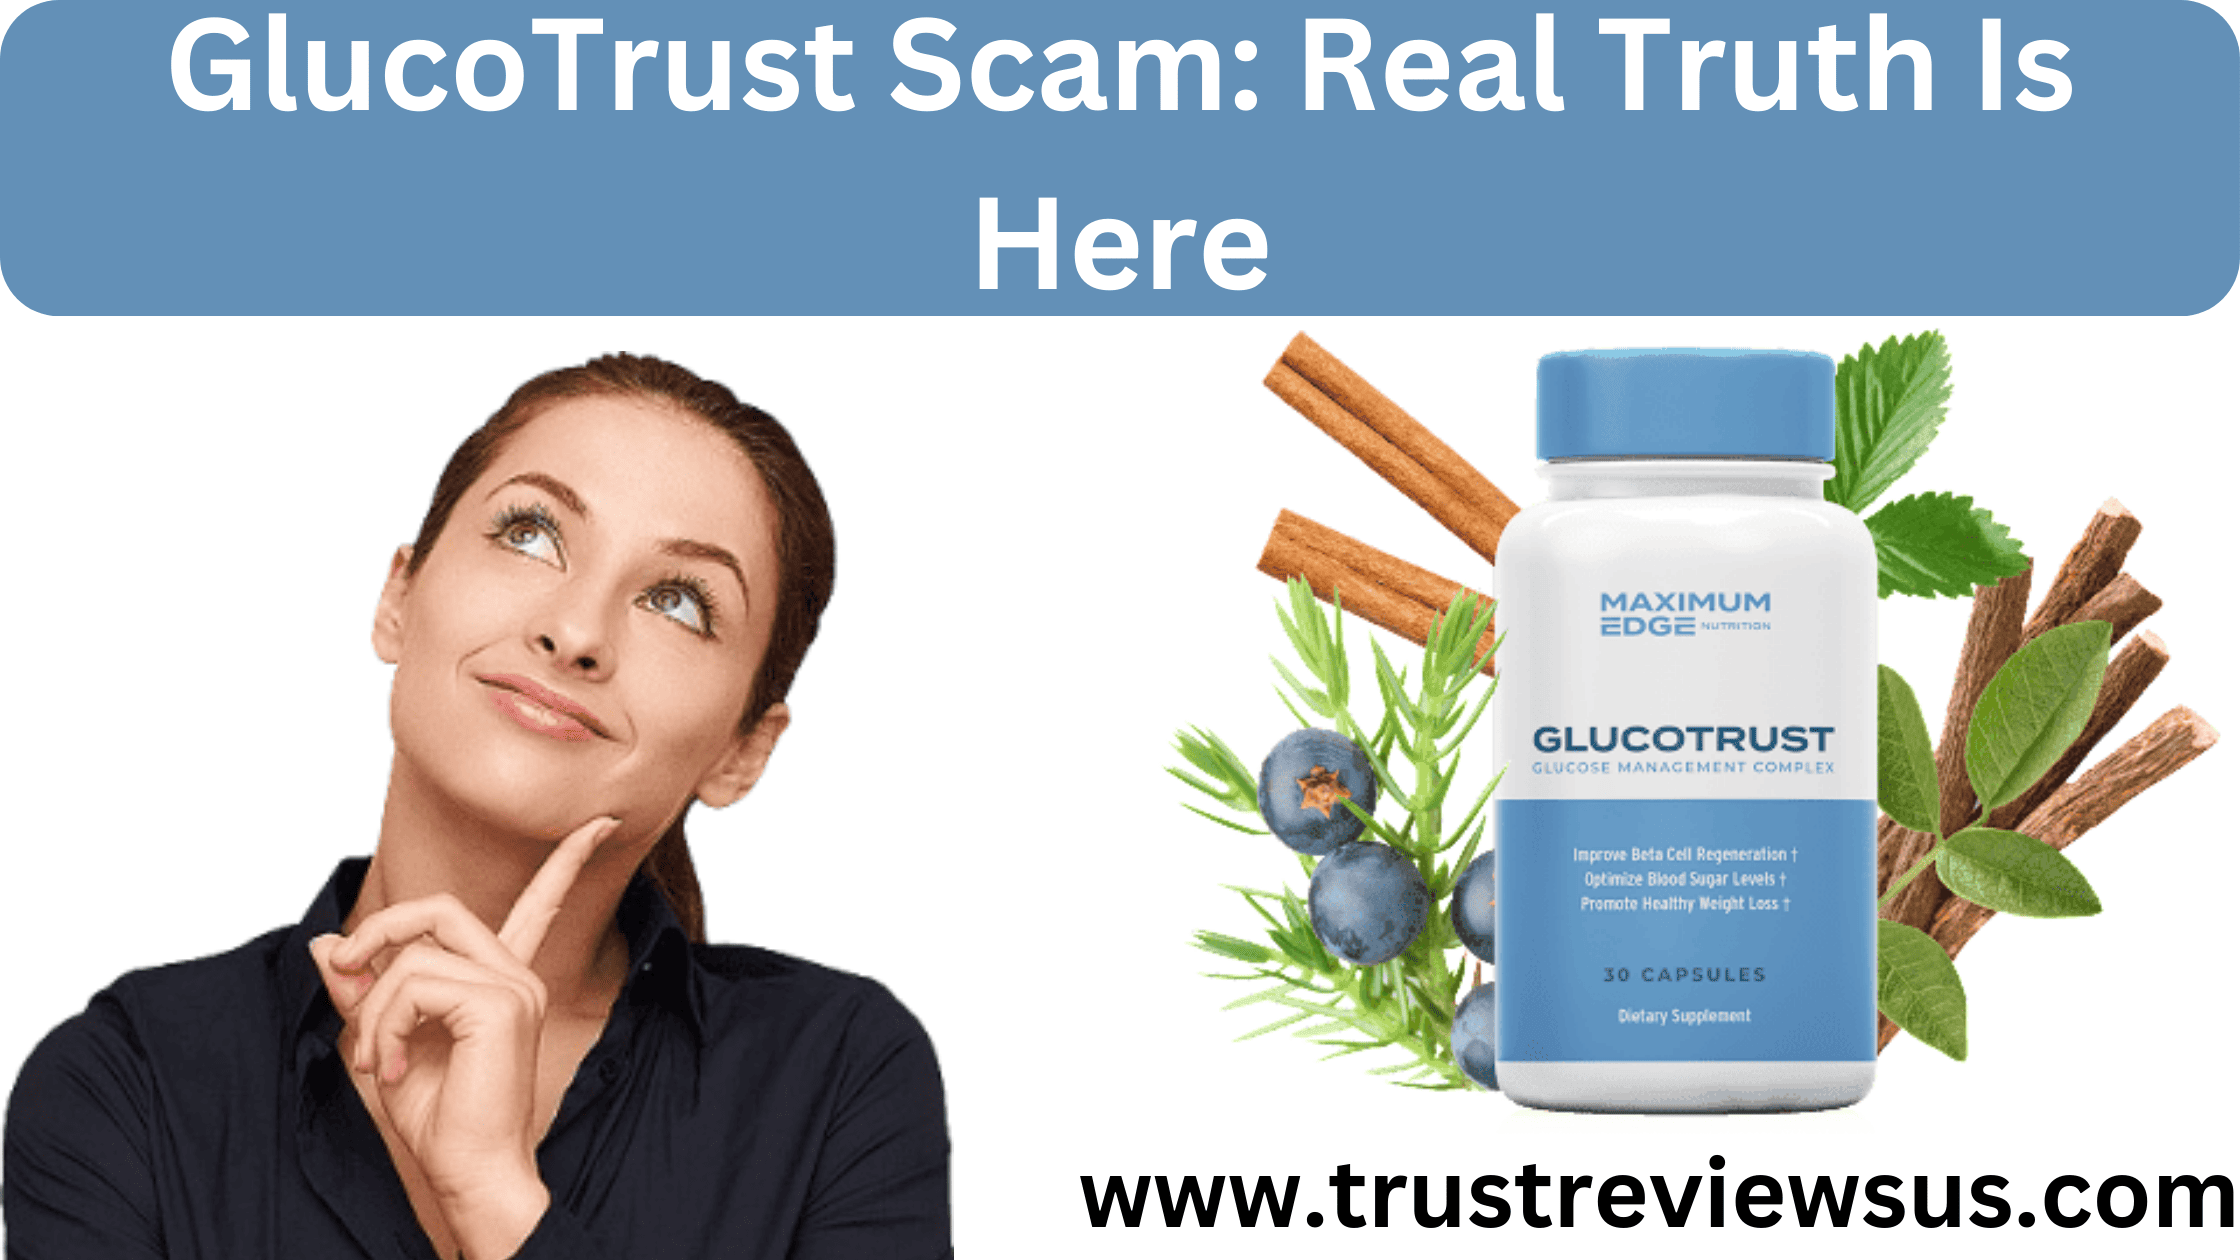 GlucoTrust Scam Real Truth Is Here